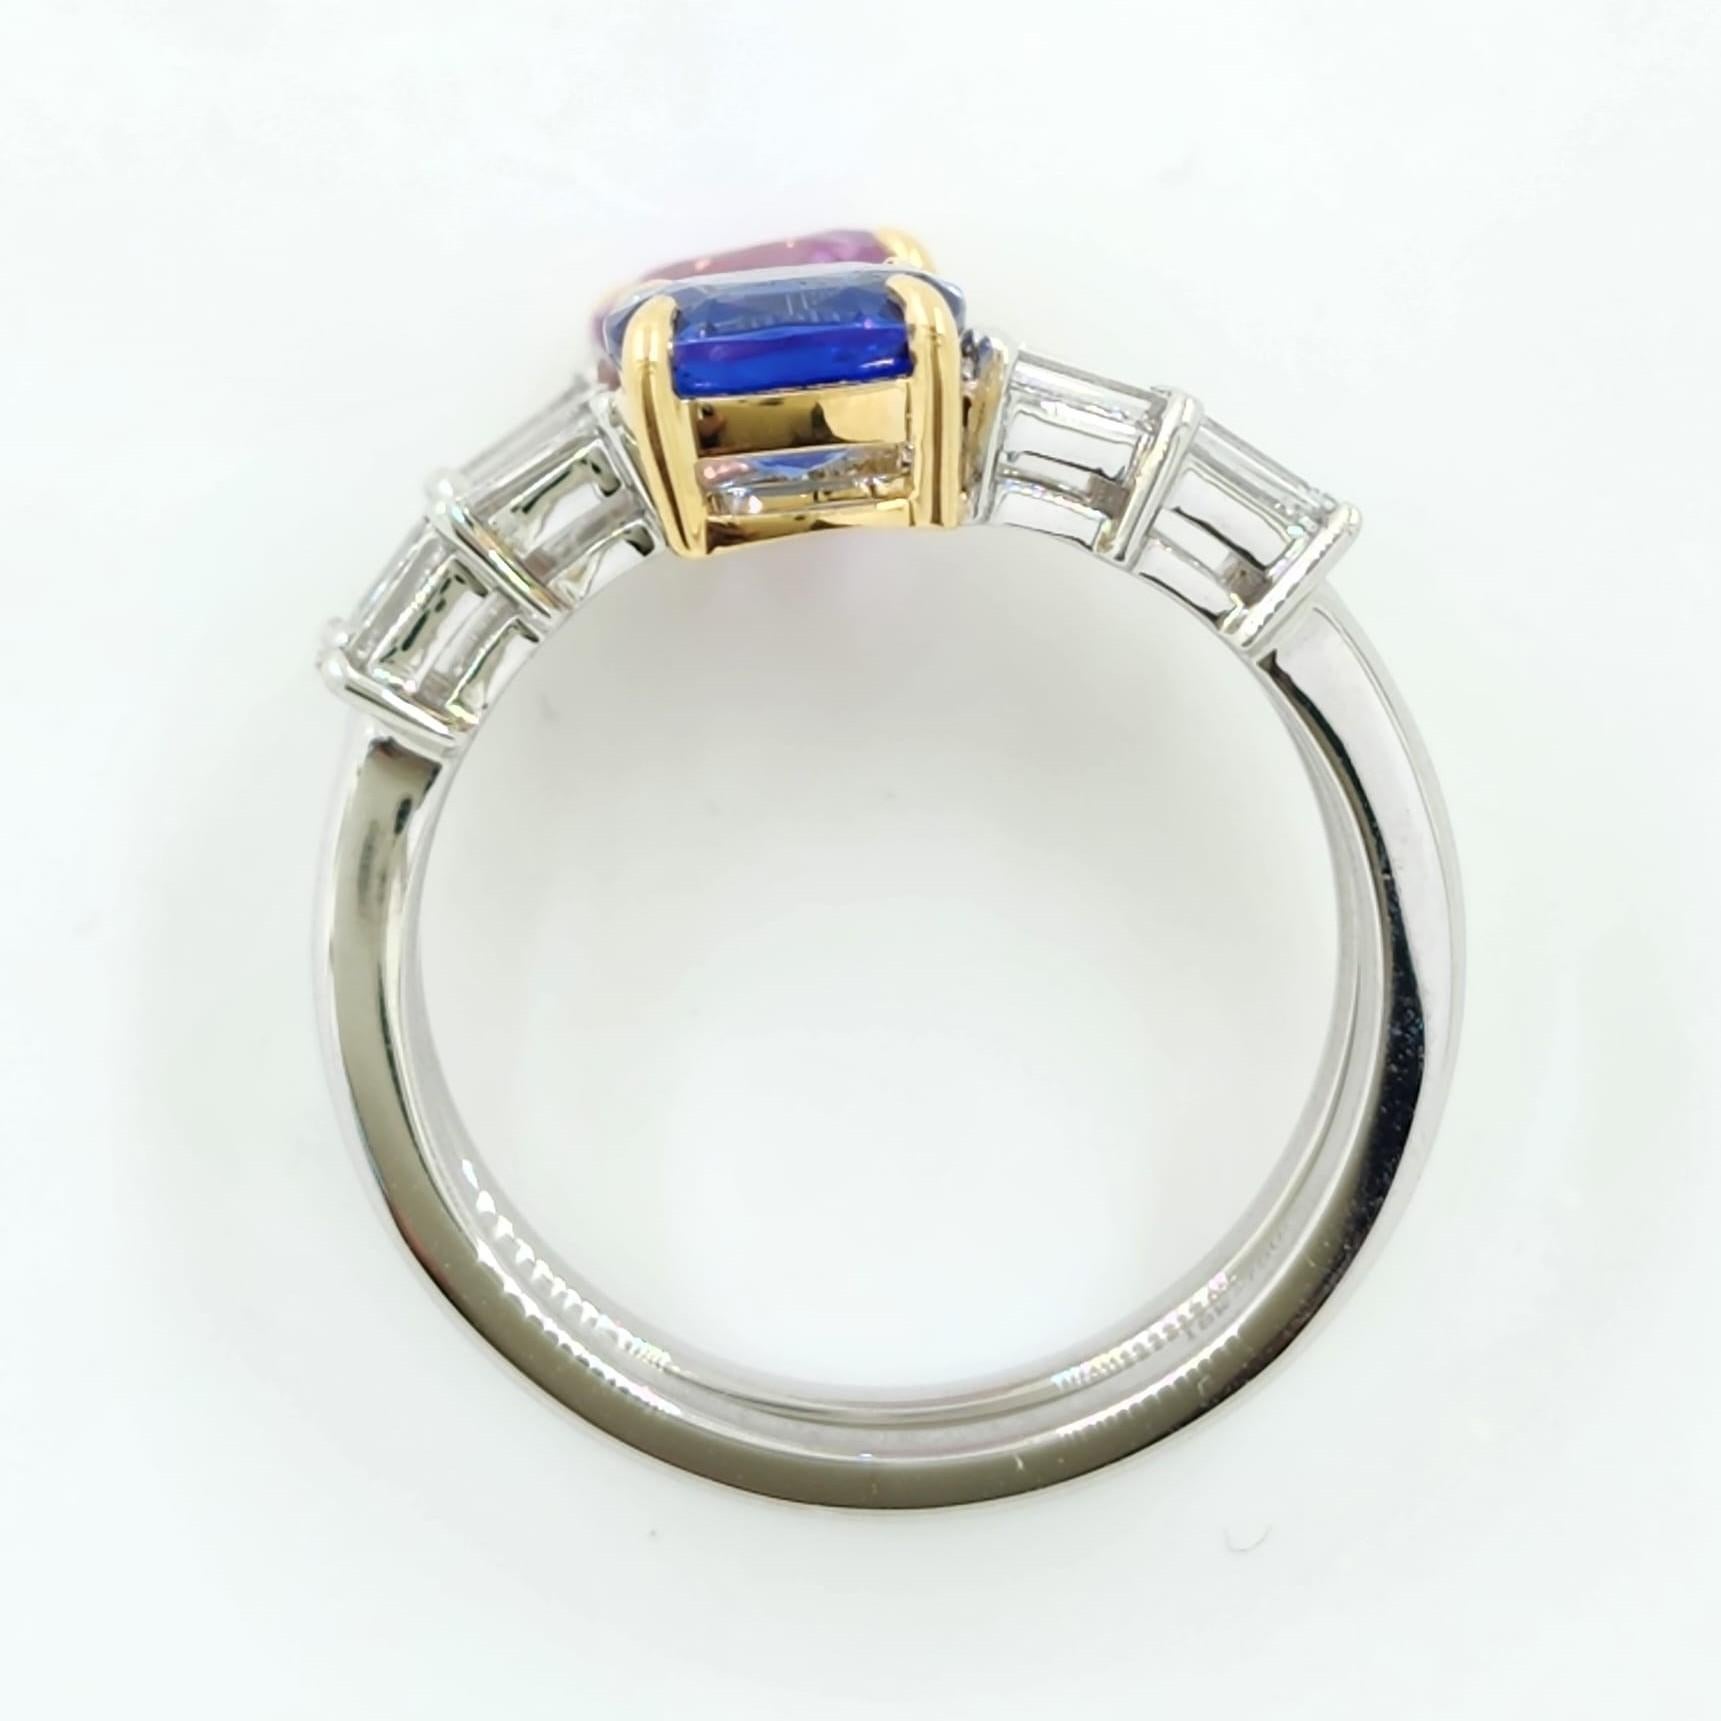 Baguette Cut 3.45 Carat Blue and Pink Sapphire Toi Et Moi Diamond Ring in 18 Karat White Gold For Sale